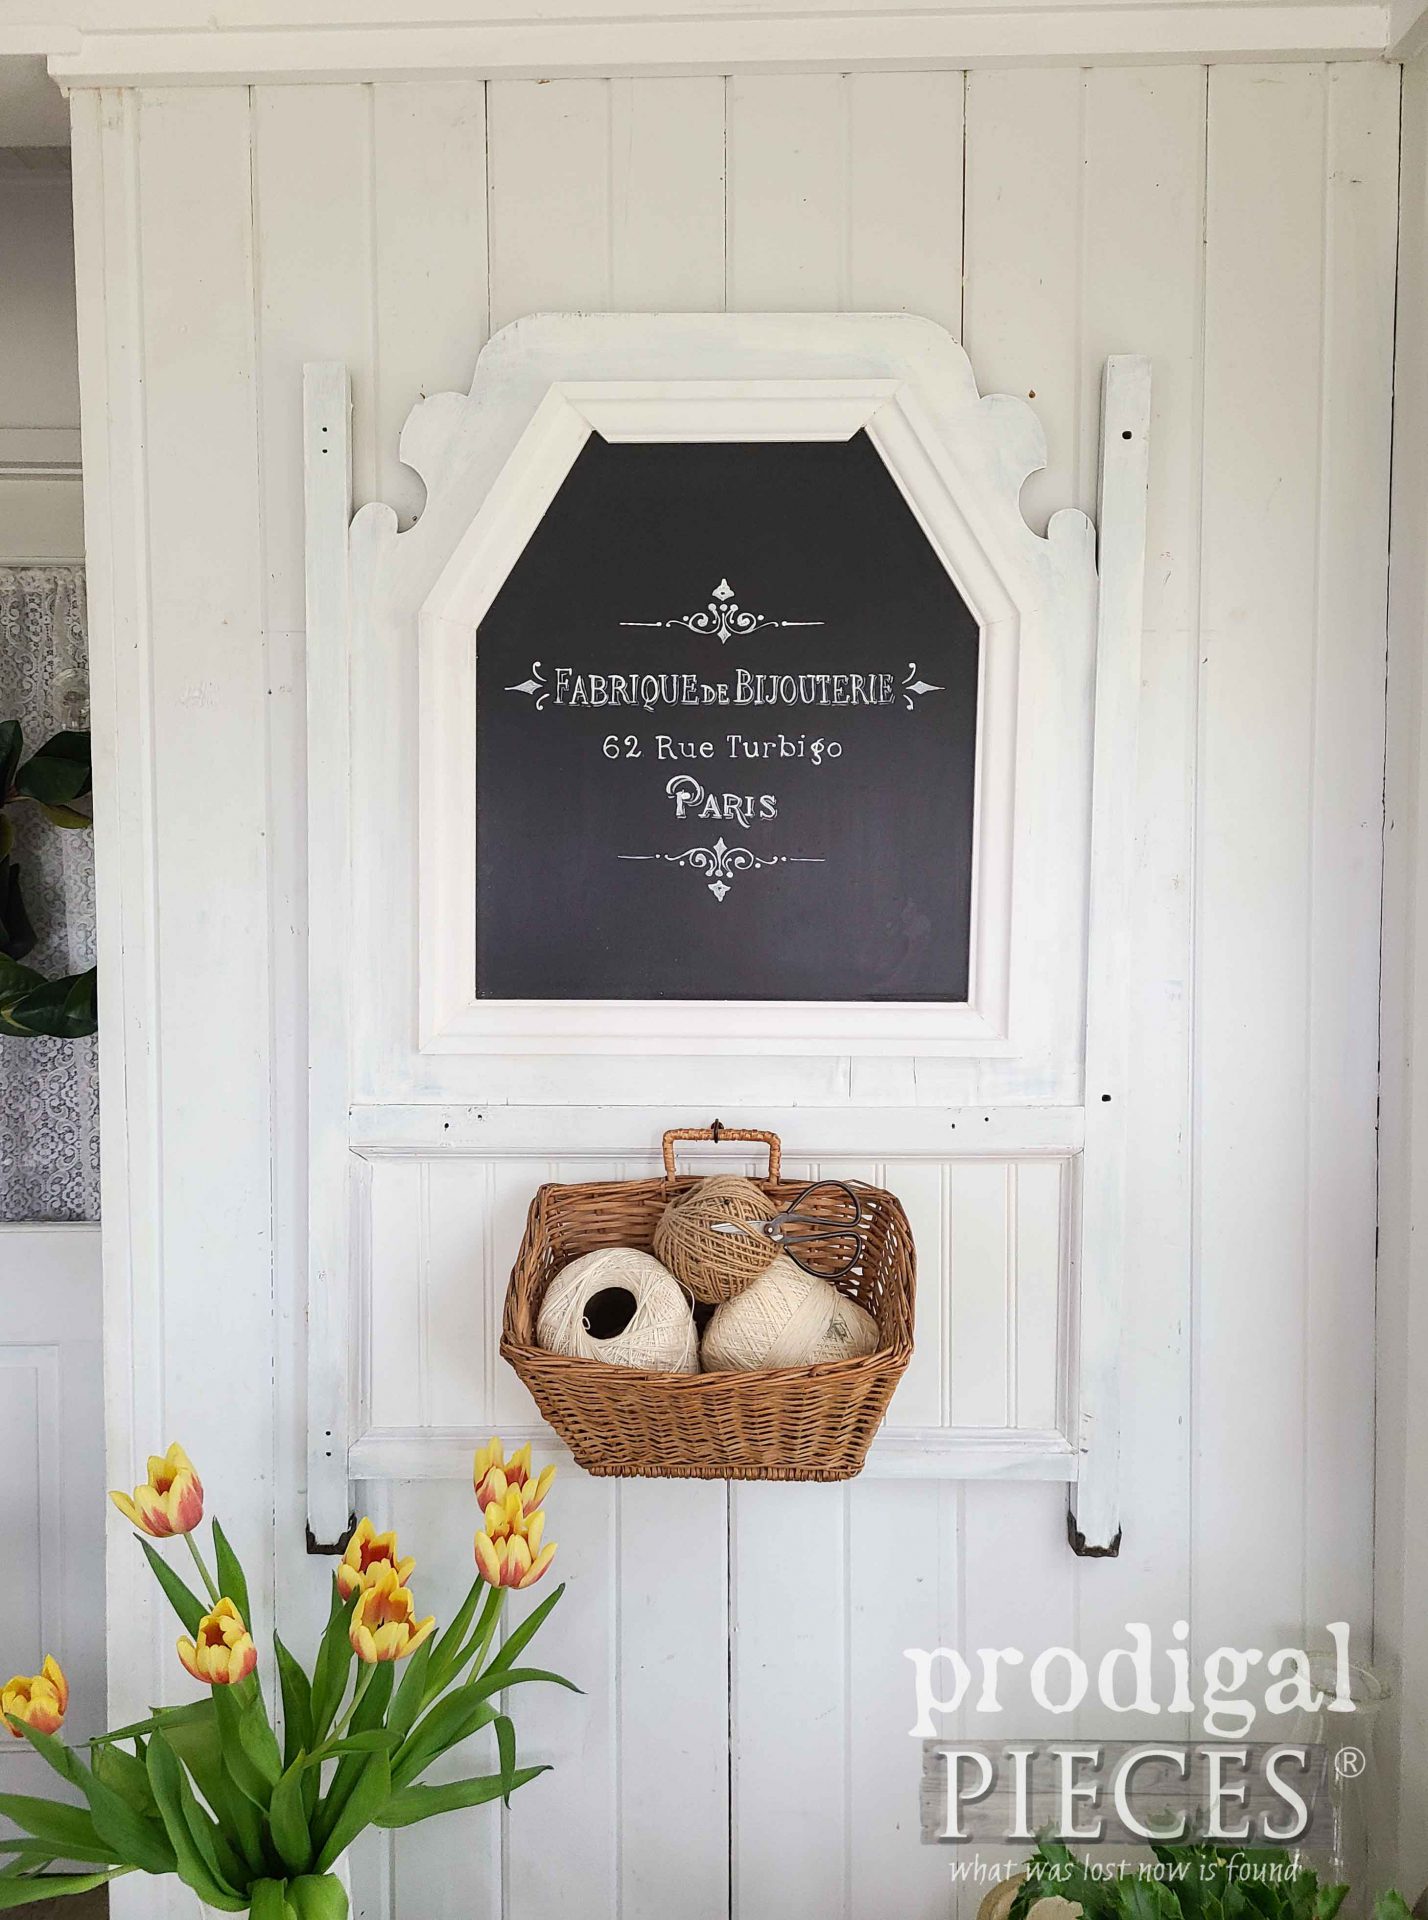 DIY French Jewelry Sign from Vintage Baby Crib Upcycled by Prodigal Pieces | prodigalpieces.com #prodigalpieces #frenchfarmhouse